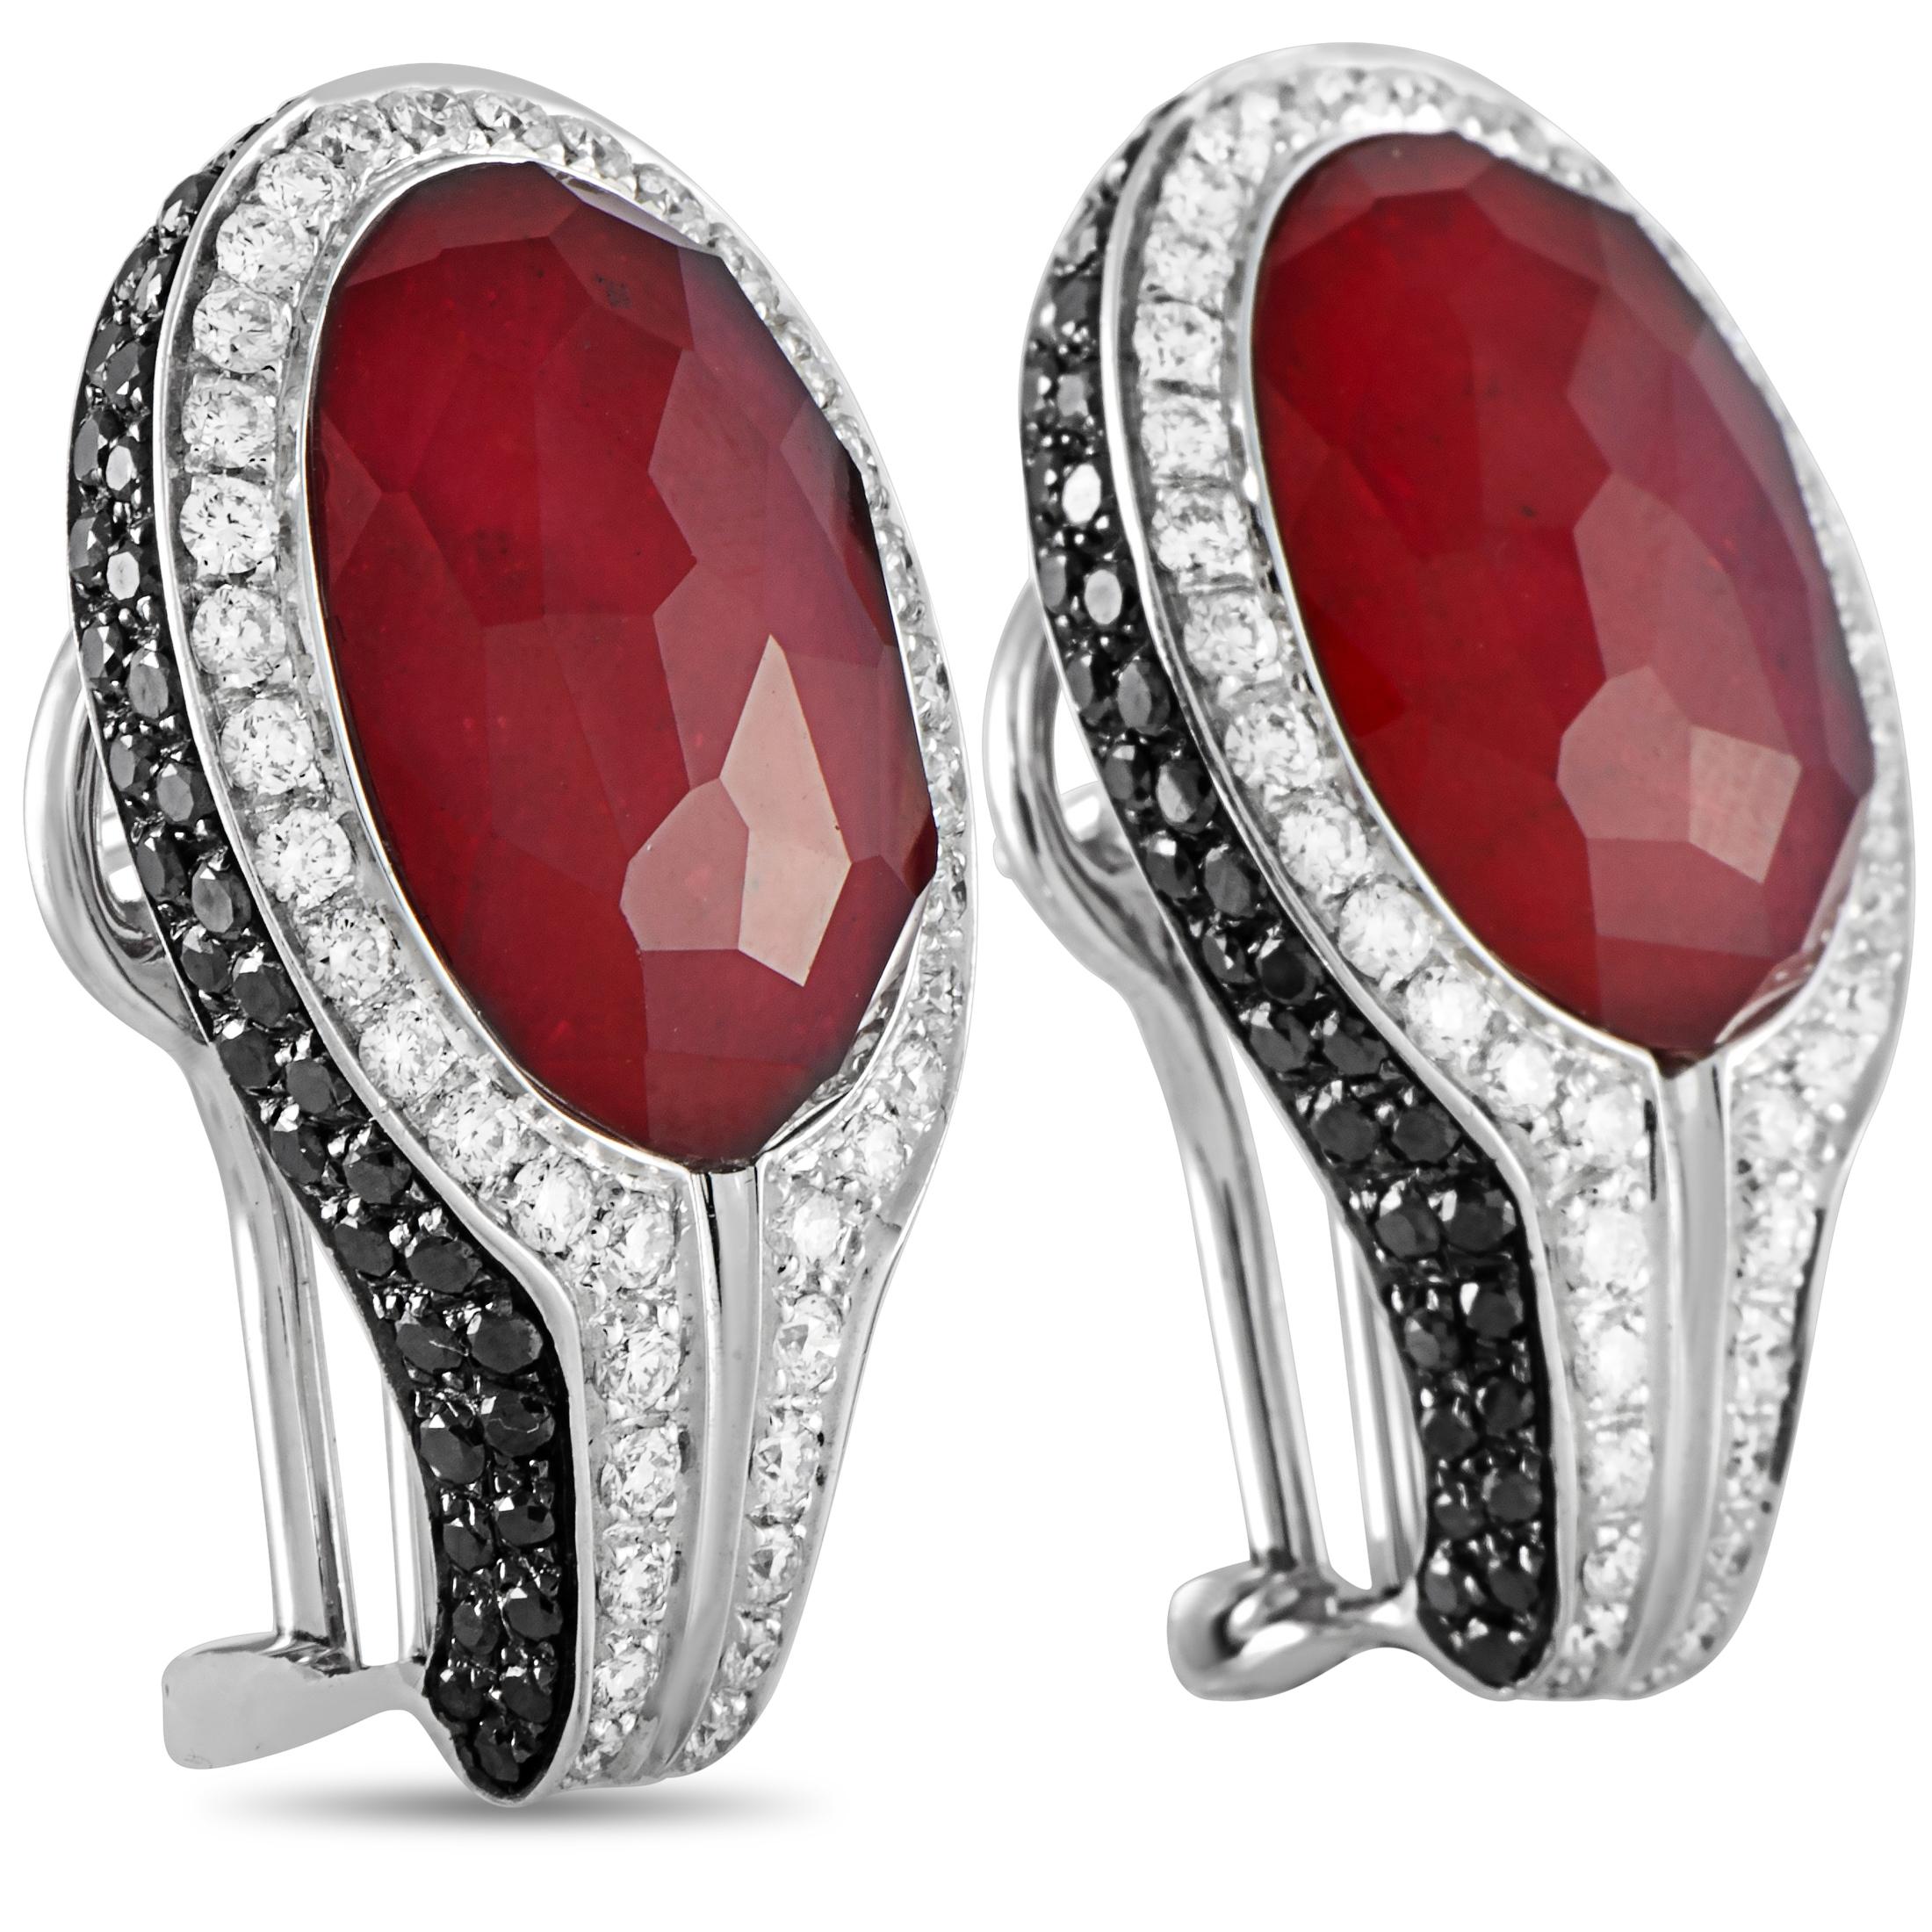 These Oro Trend earrings are crafted from 18K white gold and each of the two weighs 10.3 grams, measuring 1.10” in length and 0.40” in width. The earrings are embellished with carnelians and with white and black diamonds that total 1.38 and 2.06